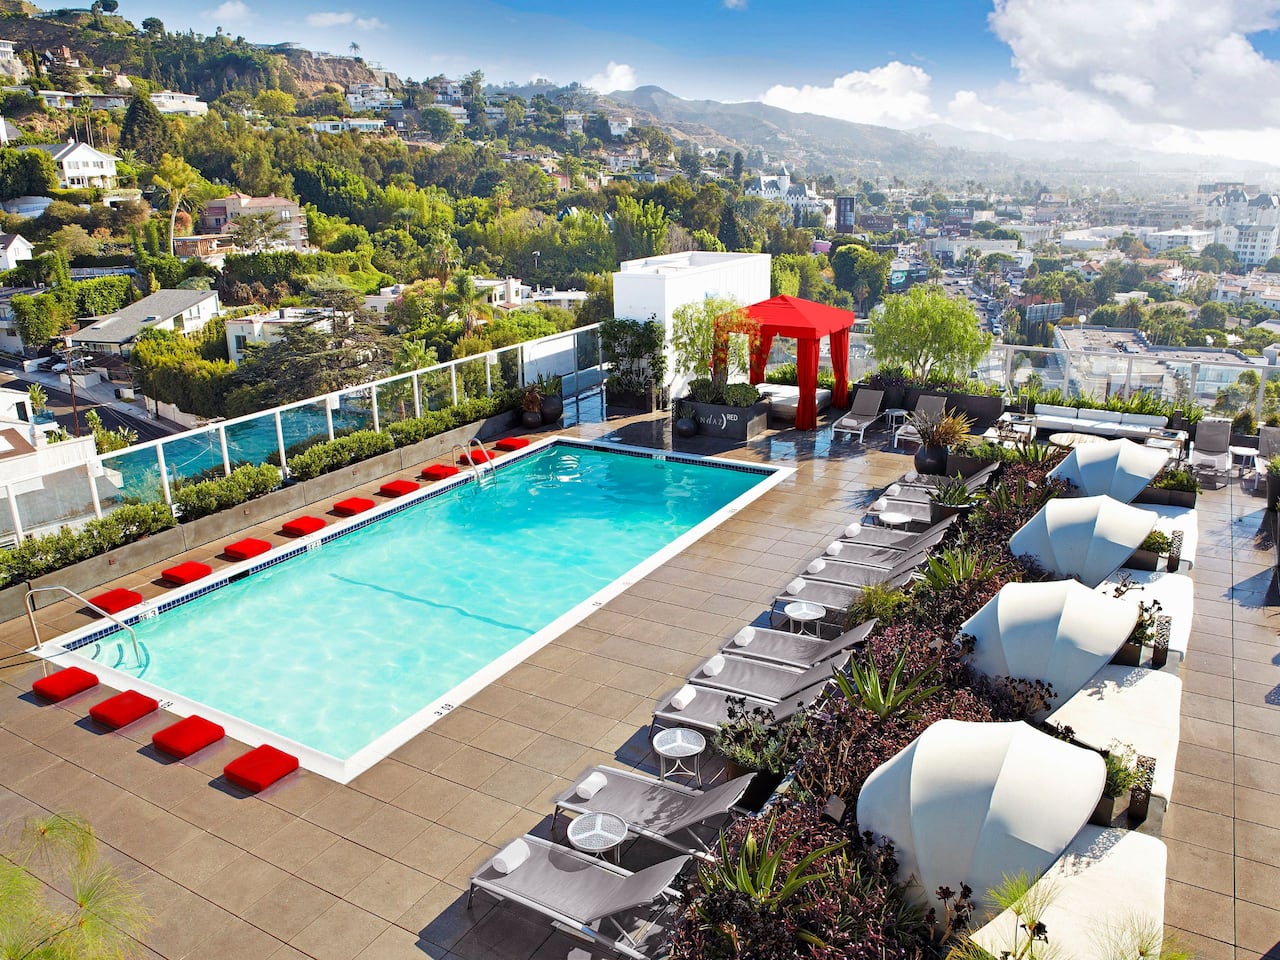 Rooftop pool and bar at a hotel near West Hollywood Los Angeles 